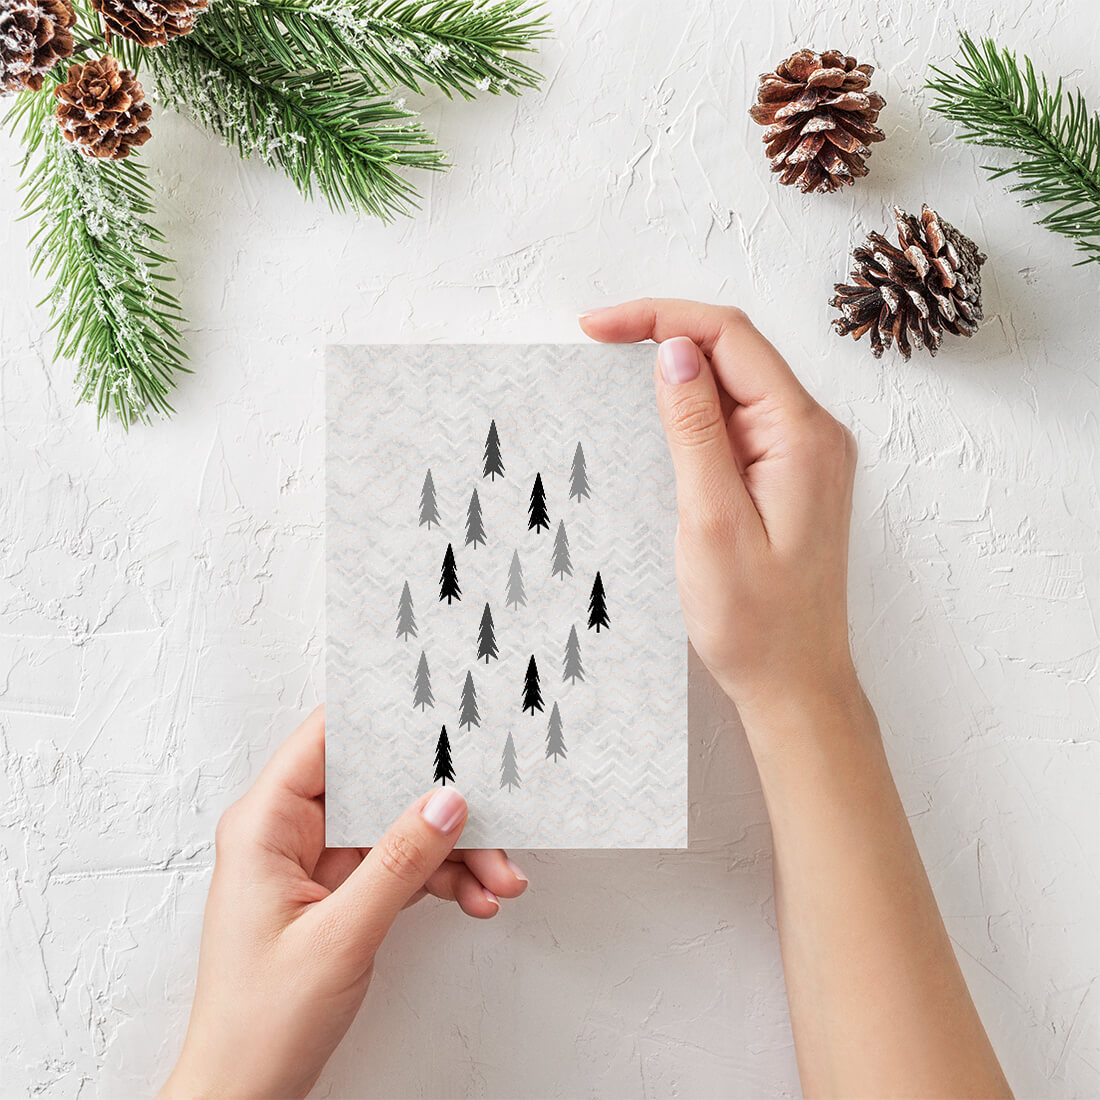 Winter Forest Free Printable • Little Gold Pixel • In which I share an abstract winter forest free printable to use as a card or decor this holiday season. Download, print and hang today!